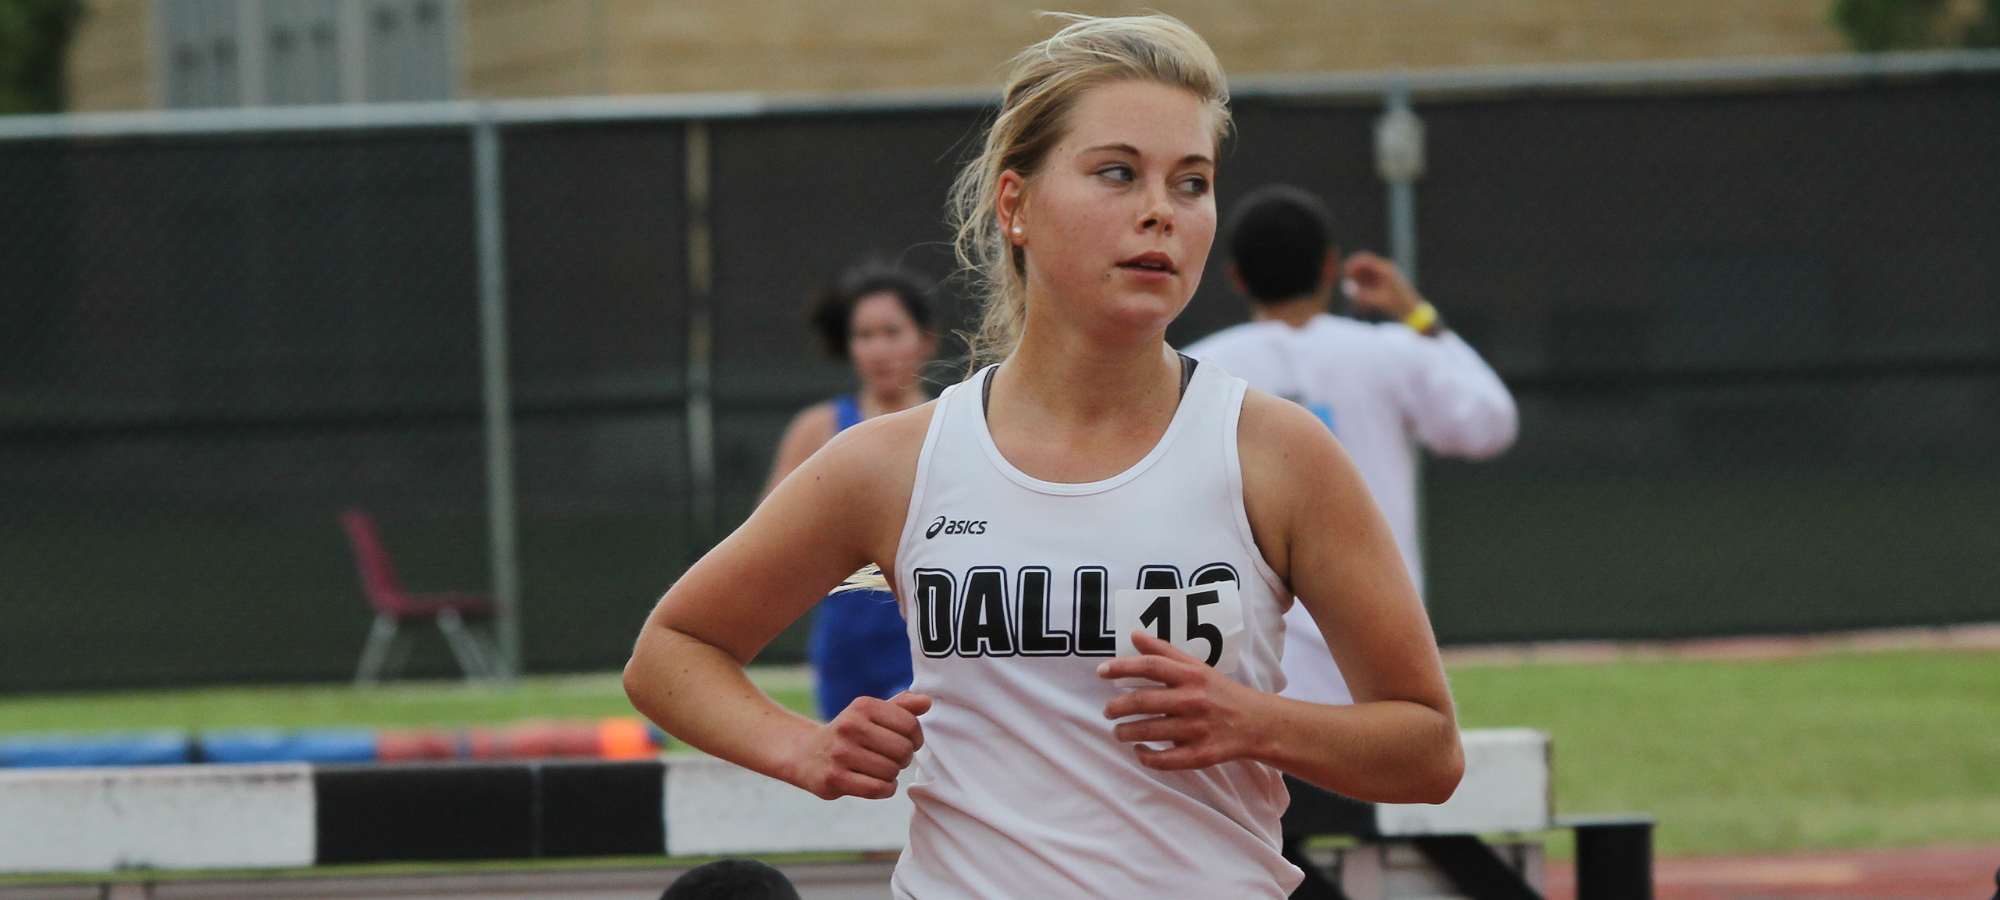 Women's Track and Field Results from McMurry Open